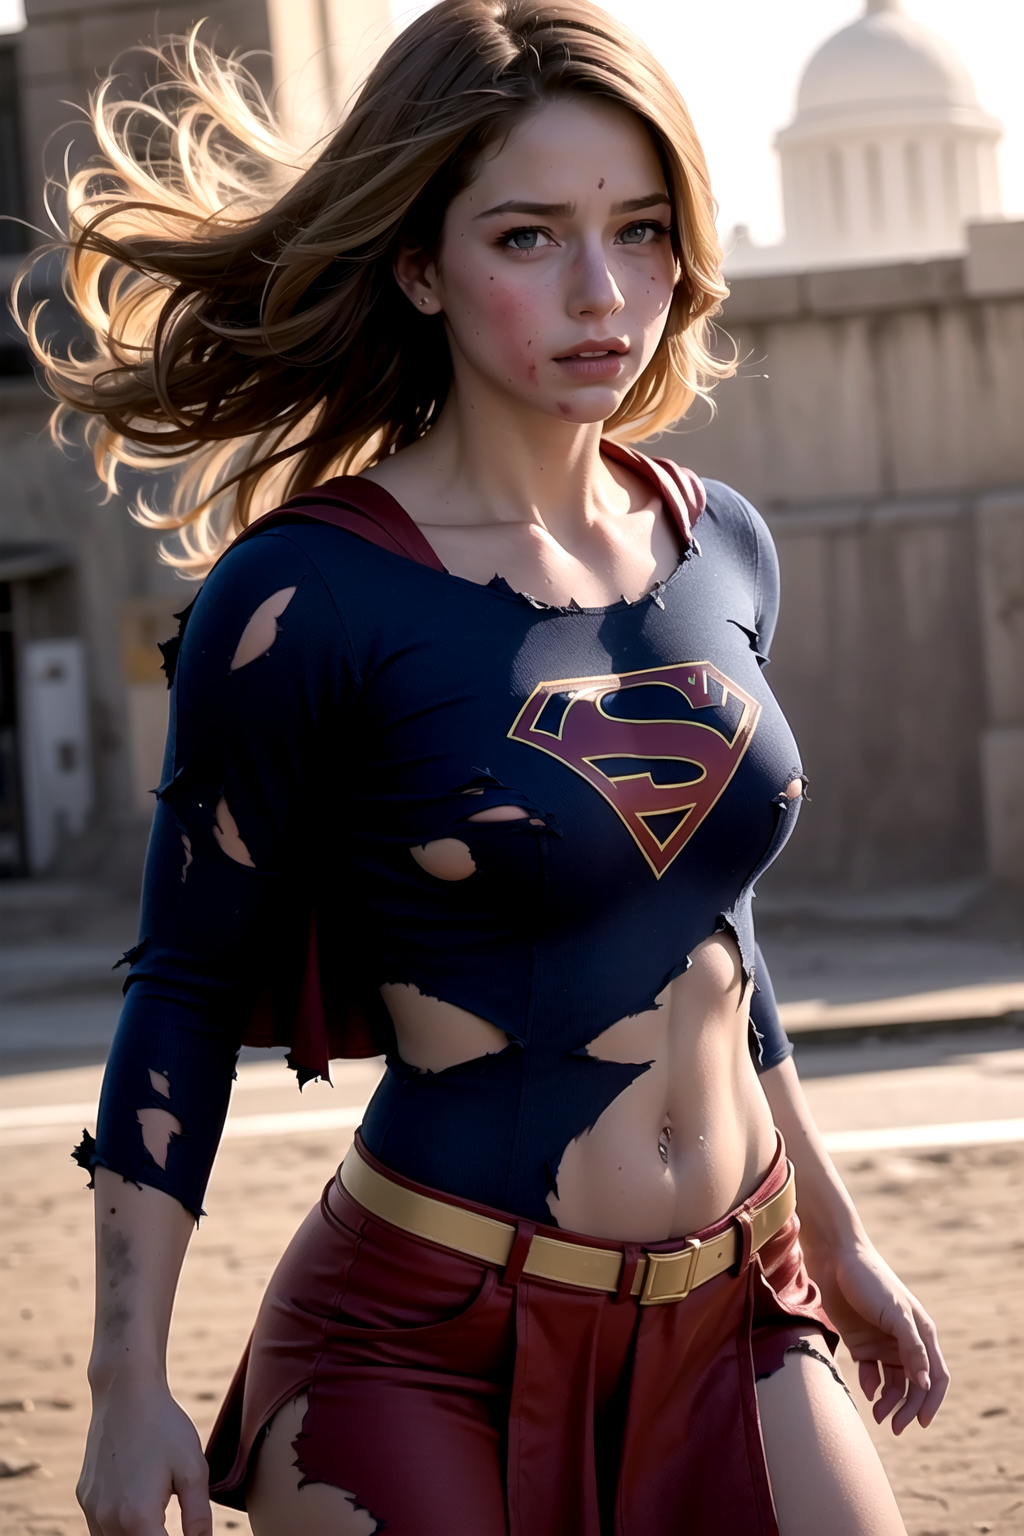 A Superheroine with a Ripped Blue Top and Gold Belt.